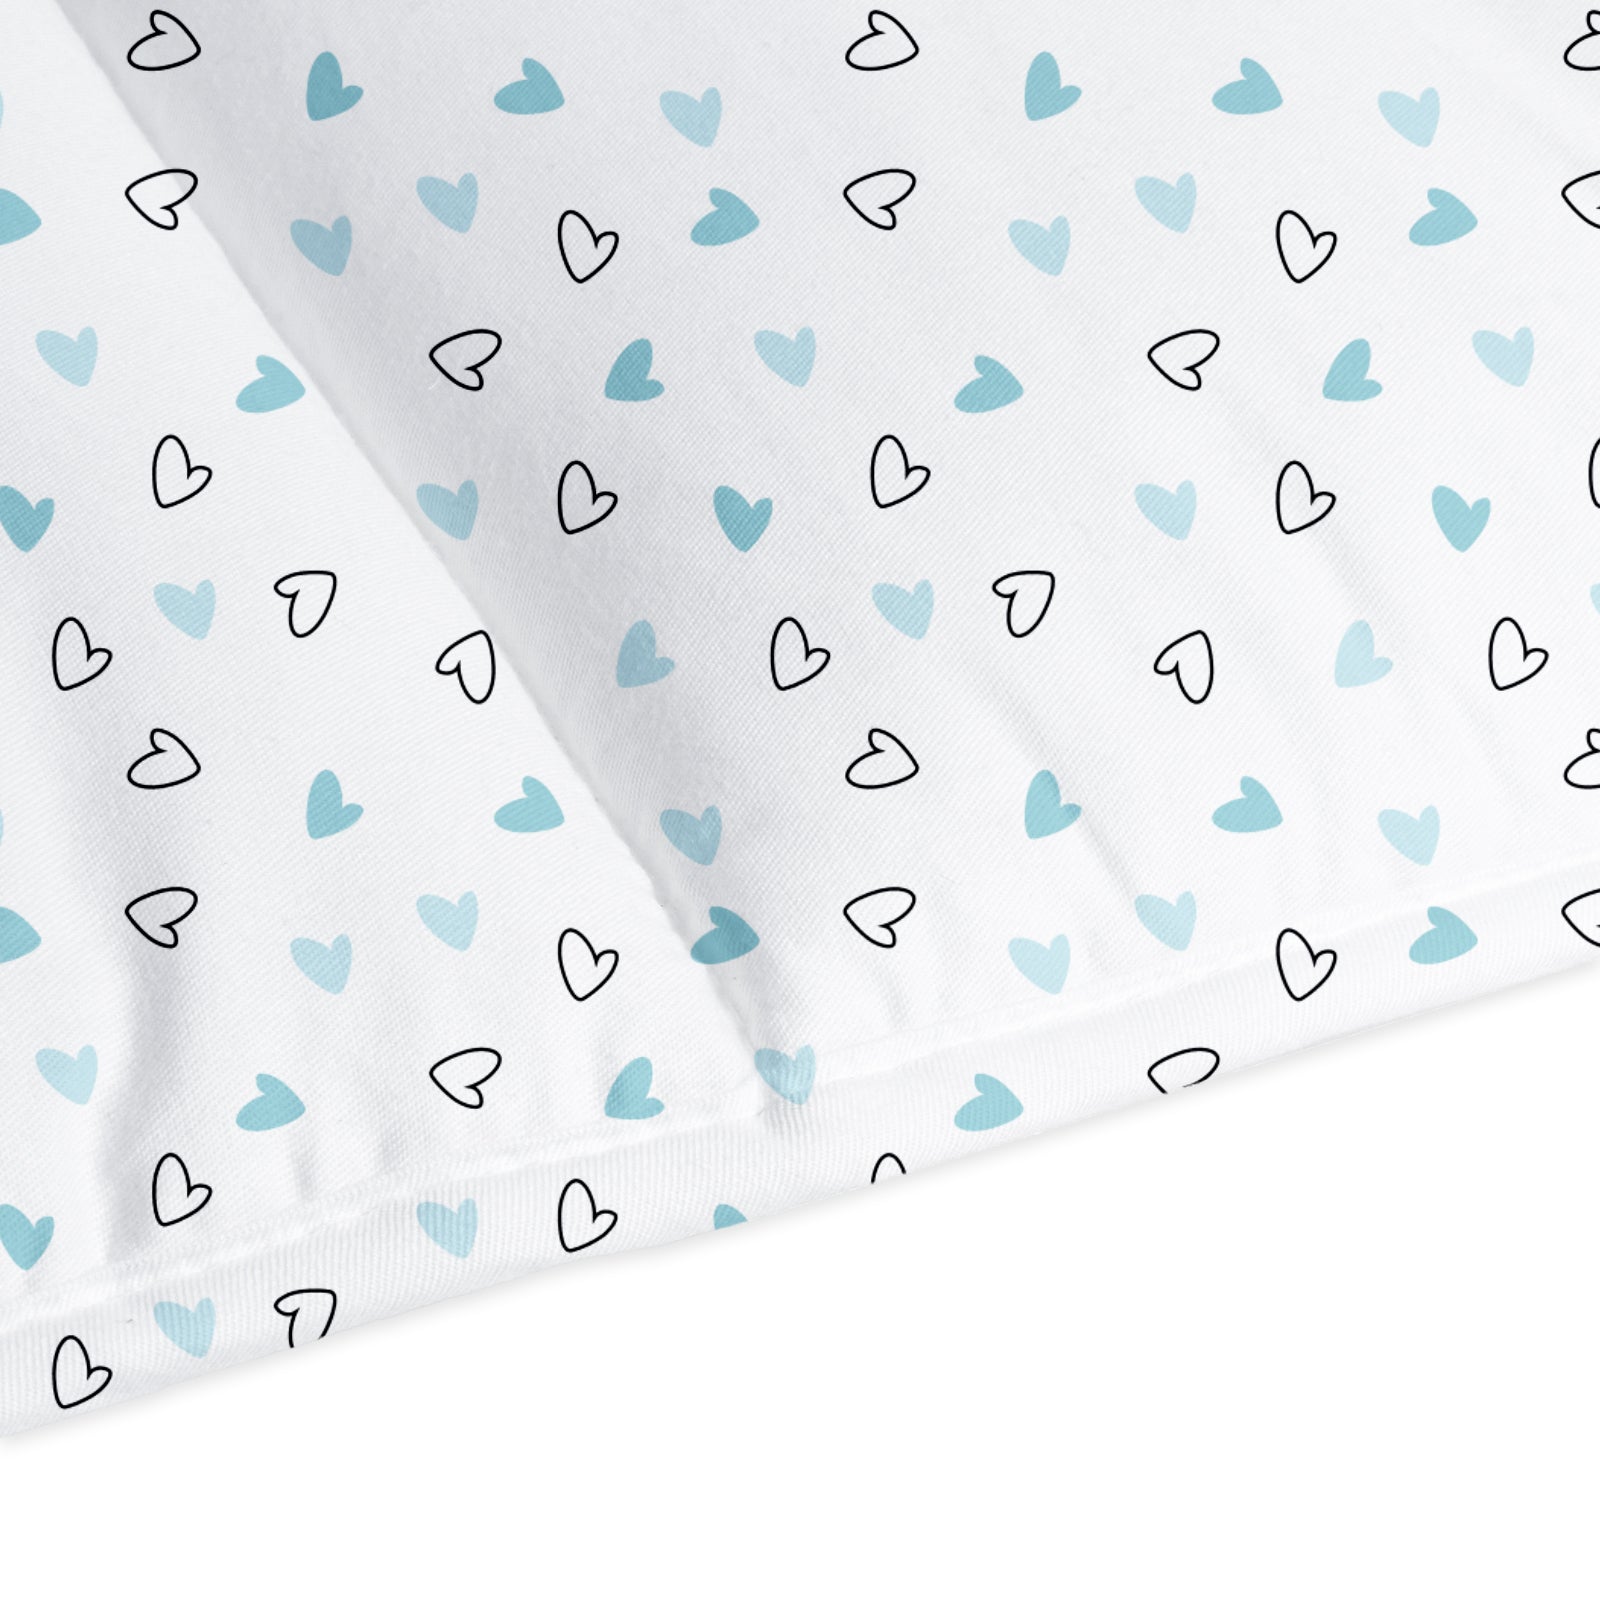 The White Cradle Baby Safe Cot Bumper Pad, Fits all Standard Cribs, Thick Padded Protective Liner for Child Nursery Bed, Soft Organic Cotton Fabric, Breathable, Non-Allergenic - Twill Blue Hearts